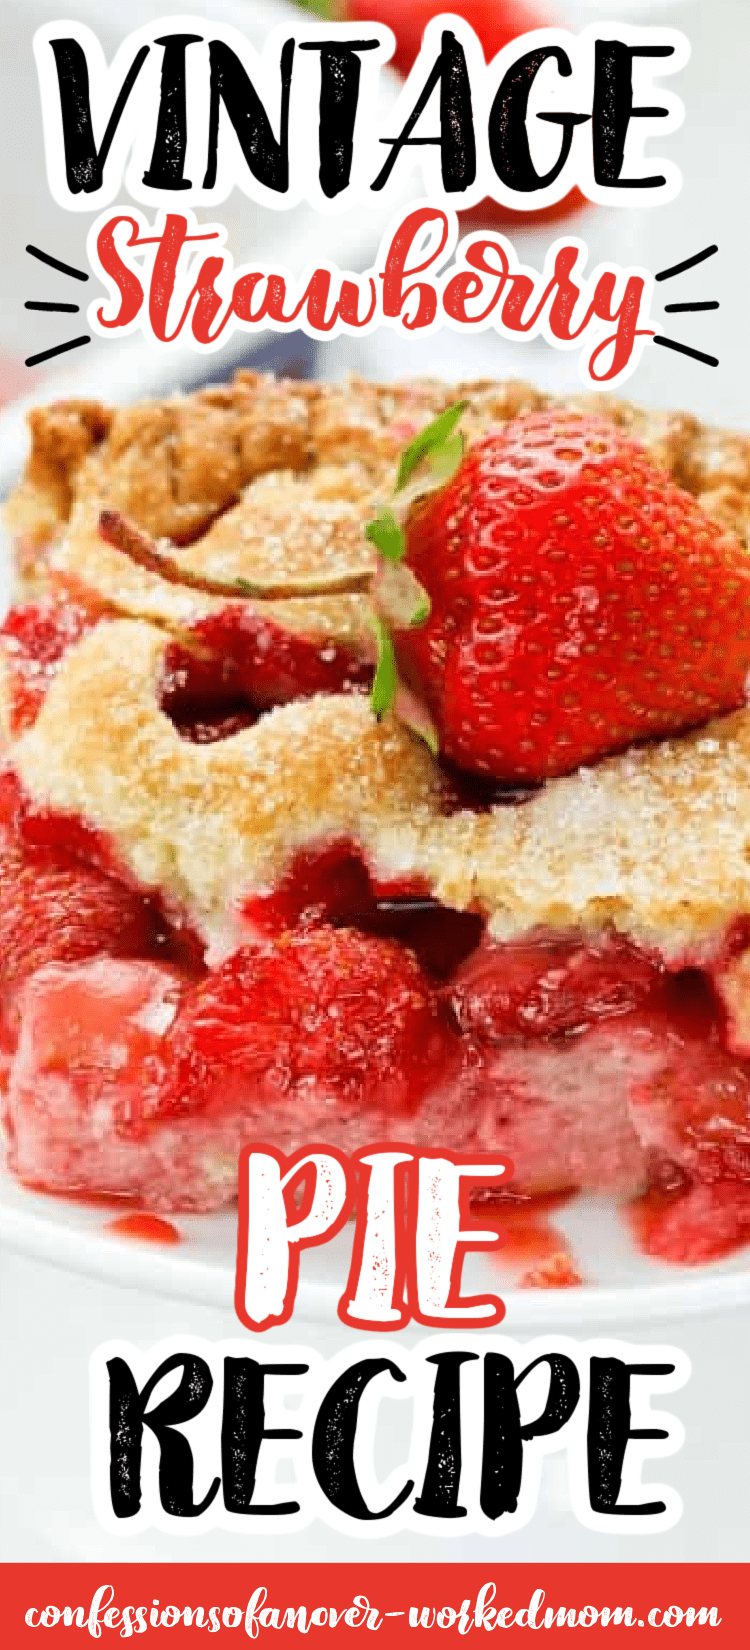 Looking for an old fashioned strawberry pie recipe? Try Aunt Jane's strawberry pie and see why it's one of my favorite homemade pies!